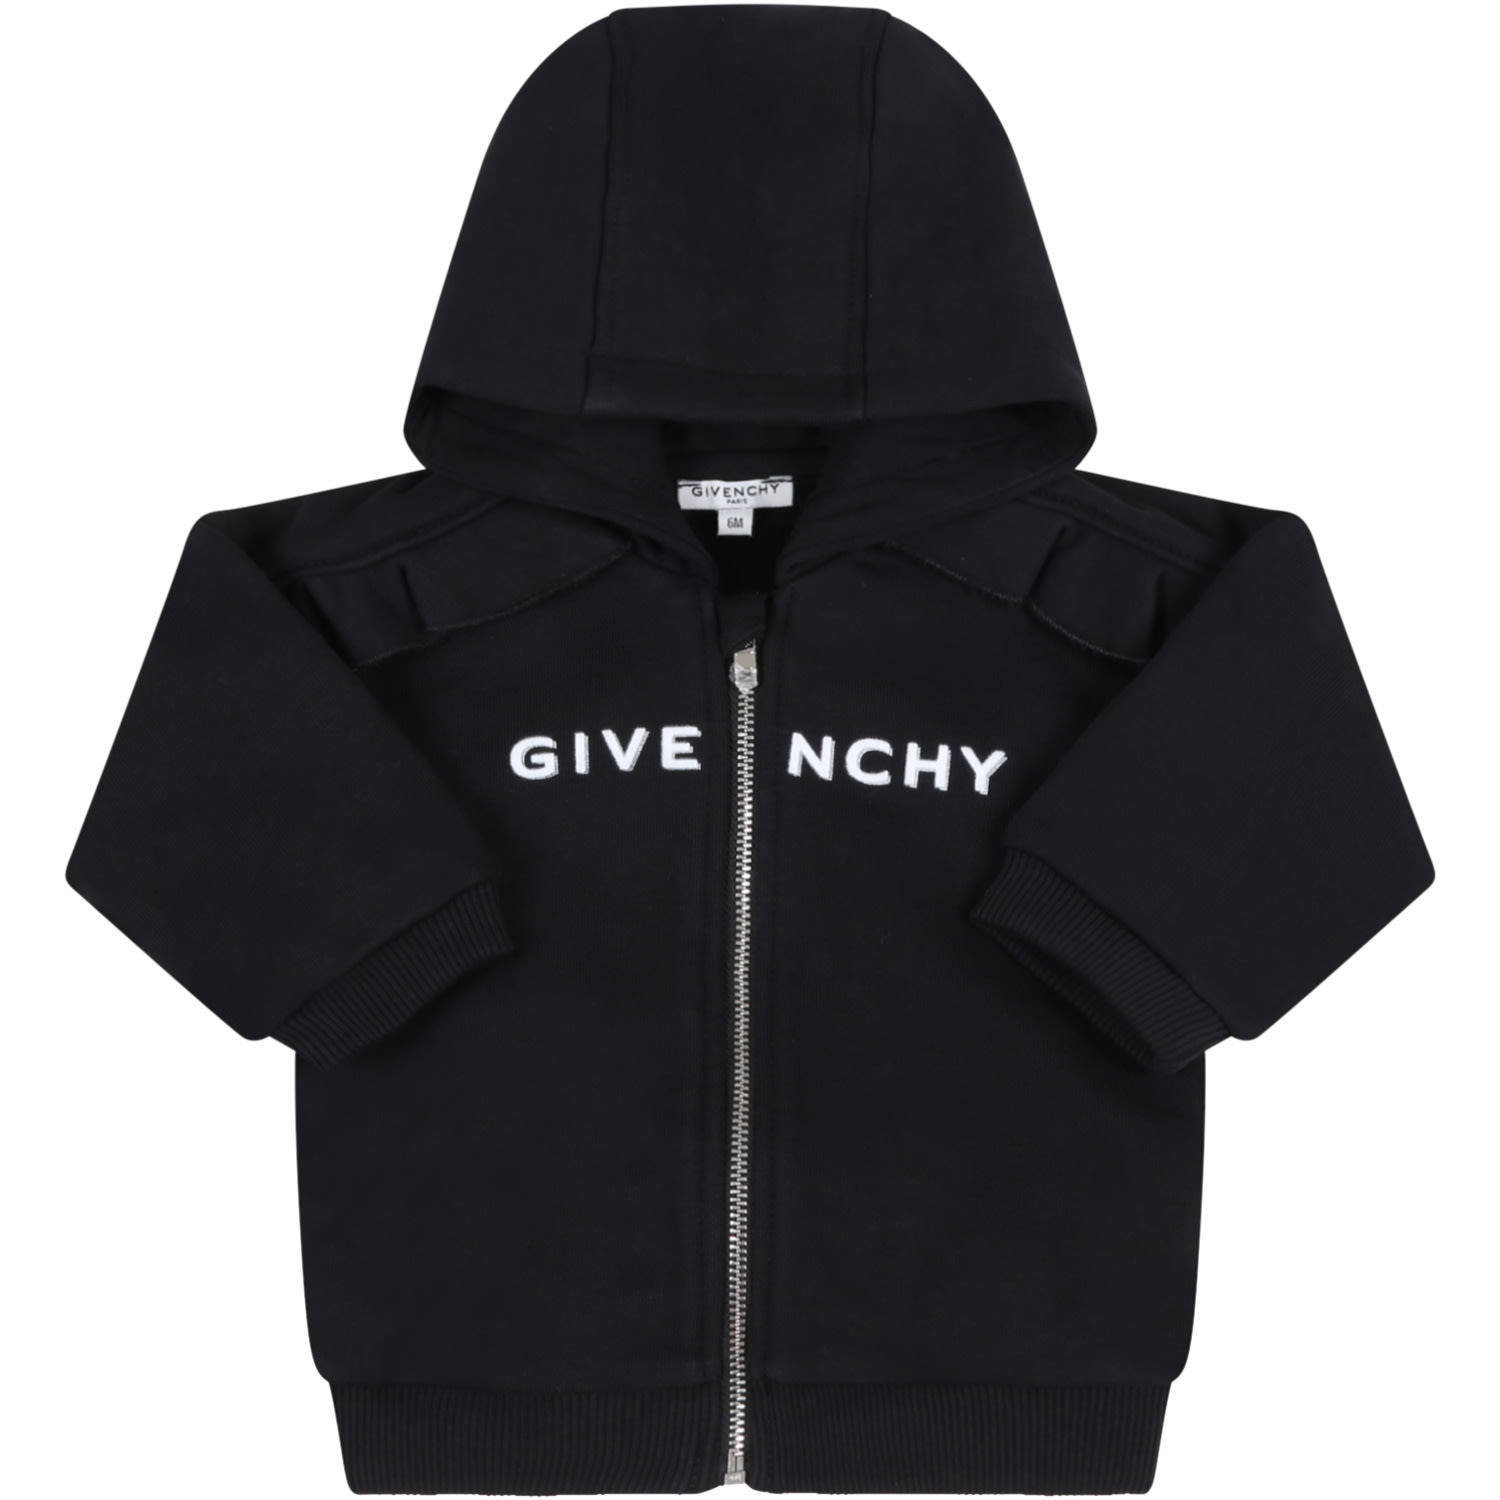 GIVENCHY BLACK SWEATSHIRT FOR BABY GIRL WITH LOGO,H05181 09B